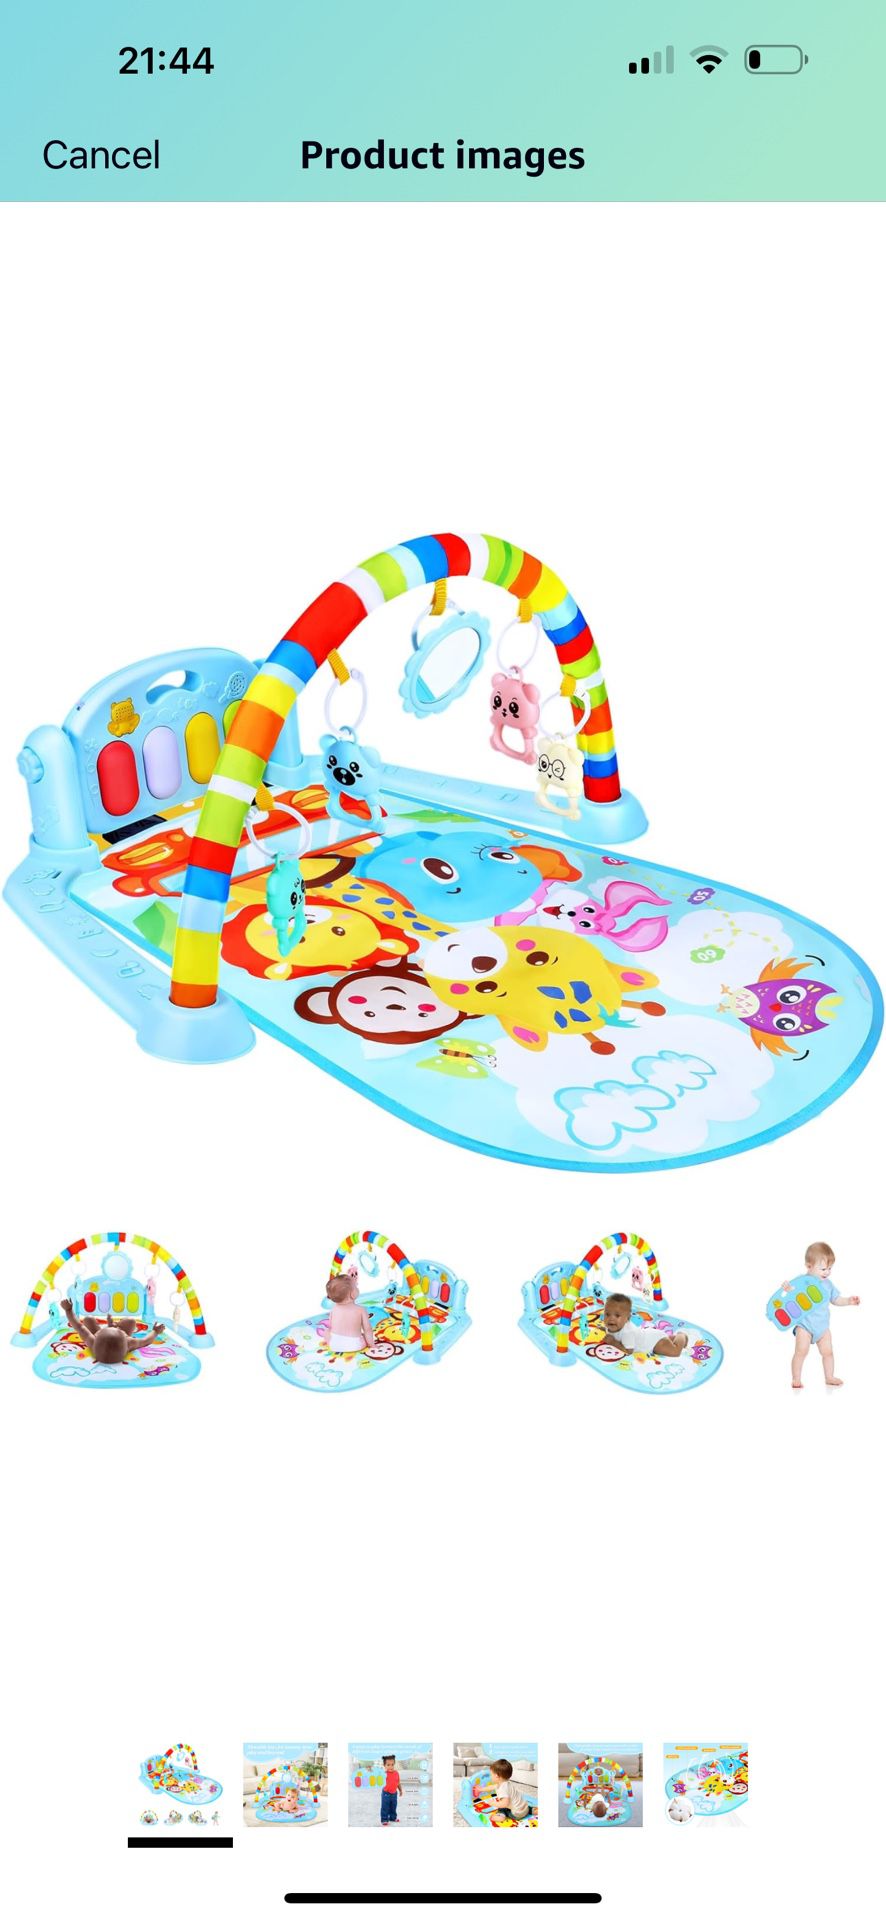 Brand New Baby Gyms Play Mats, Tummy Time Play Mat with Muscial Toy Lights, Kick & Play Piano Gym Activity Center 